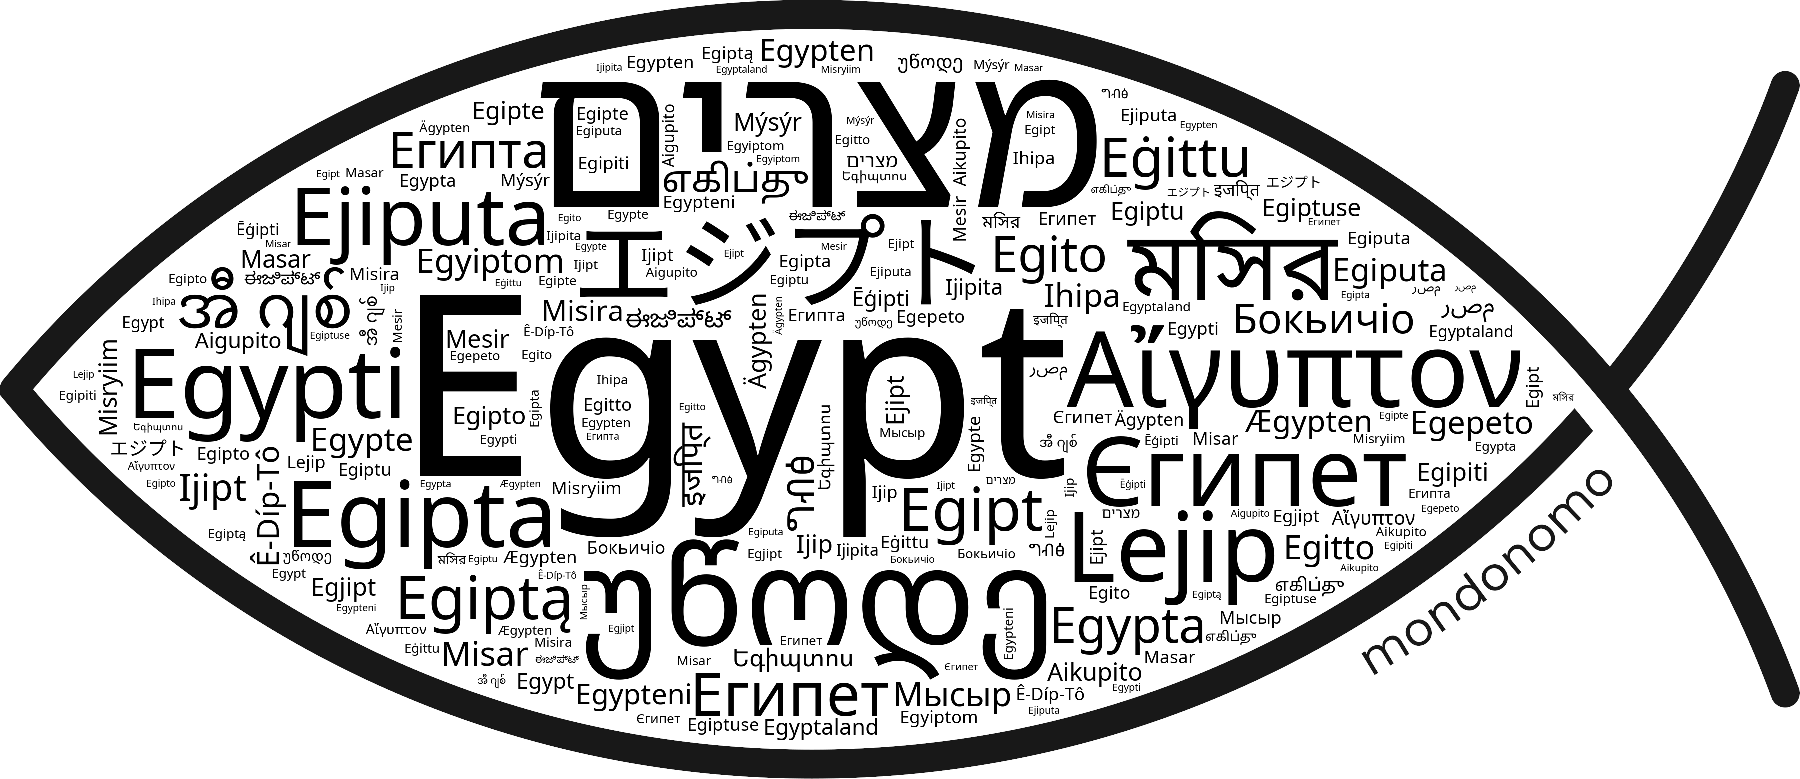 Name Egypt in the world's Bibles